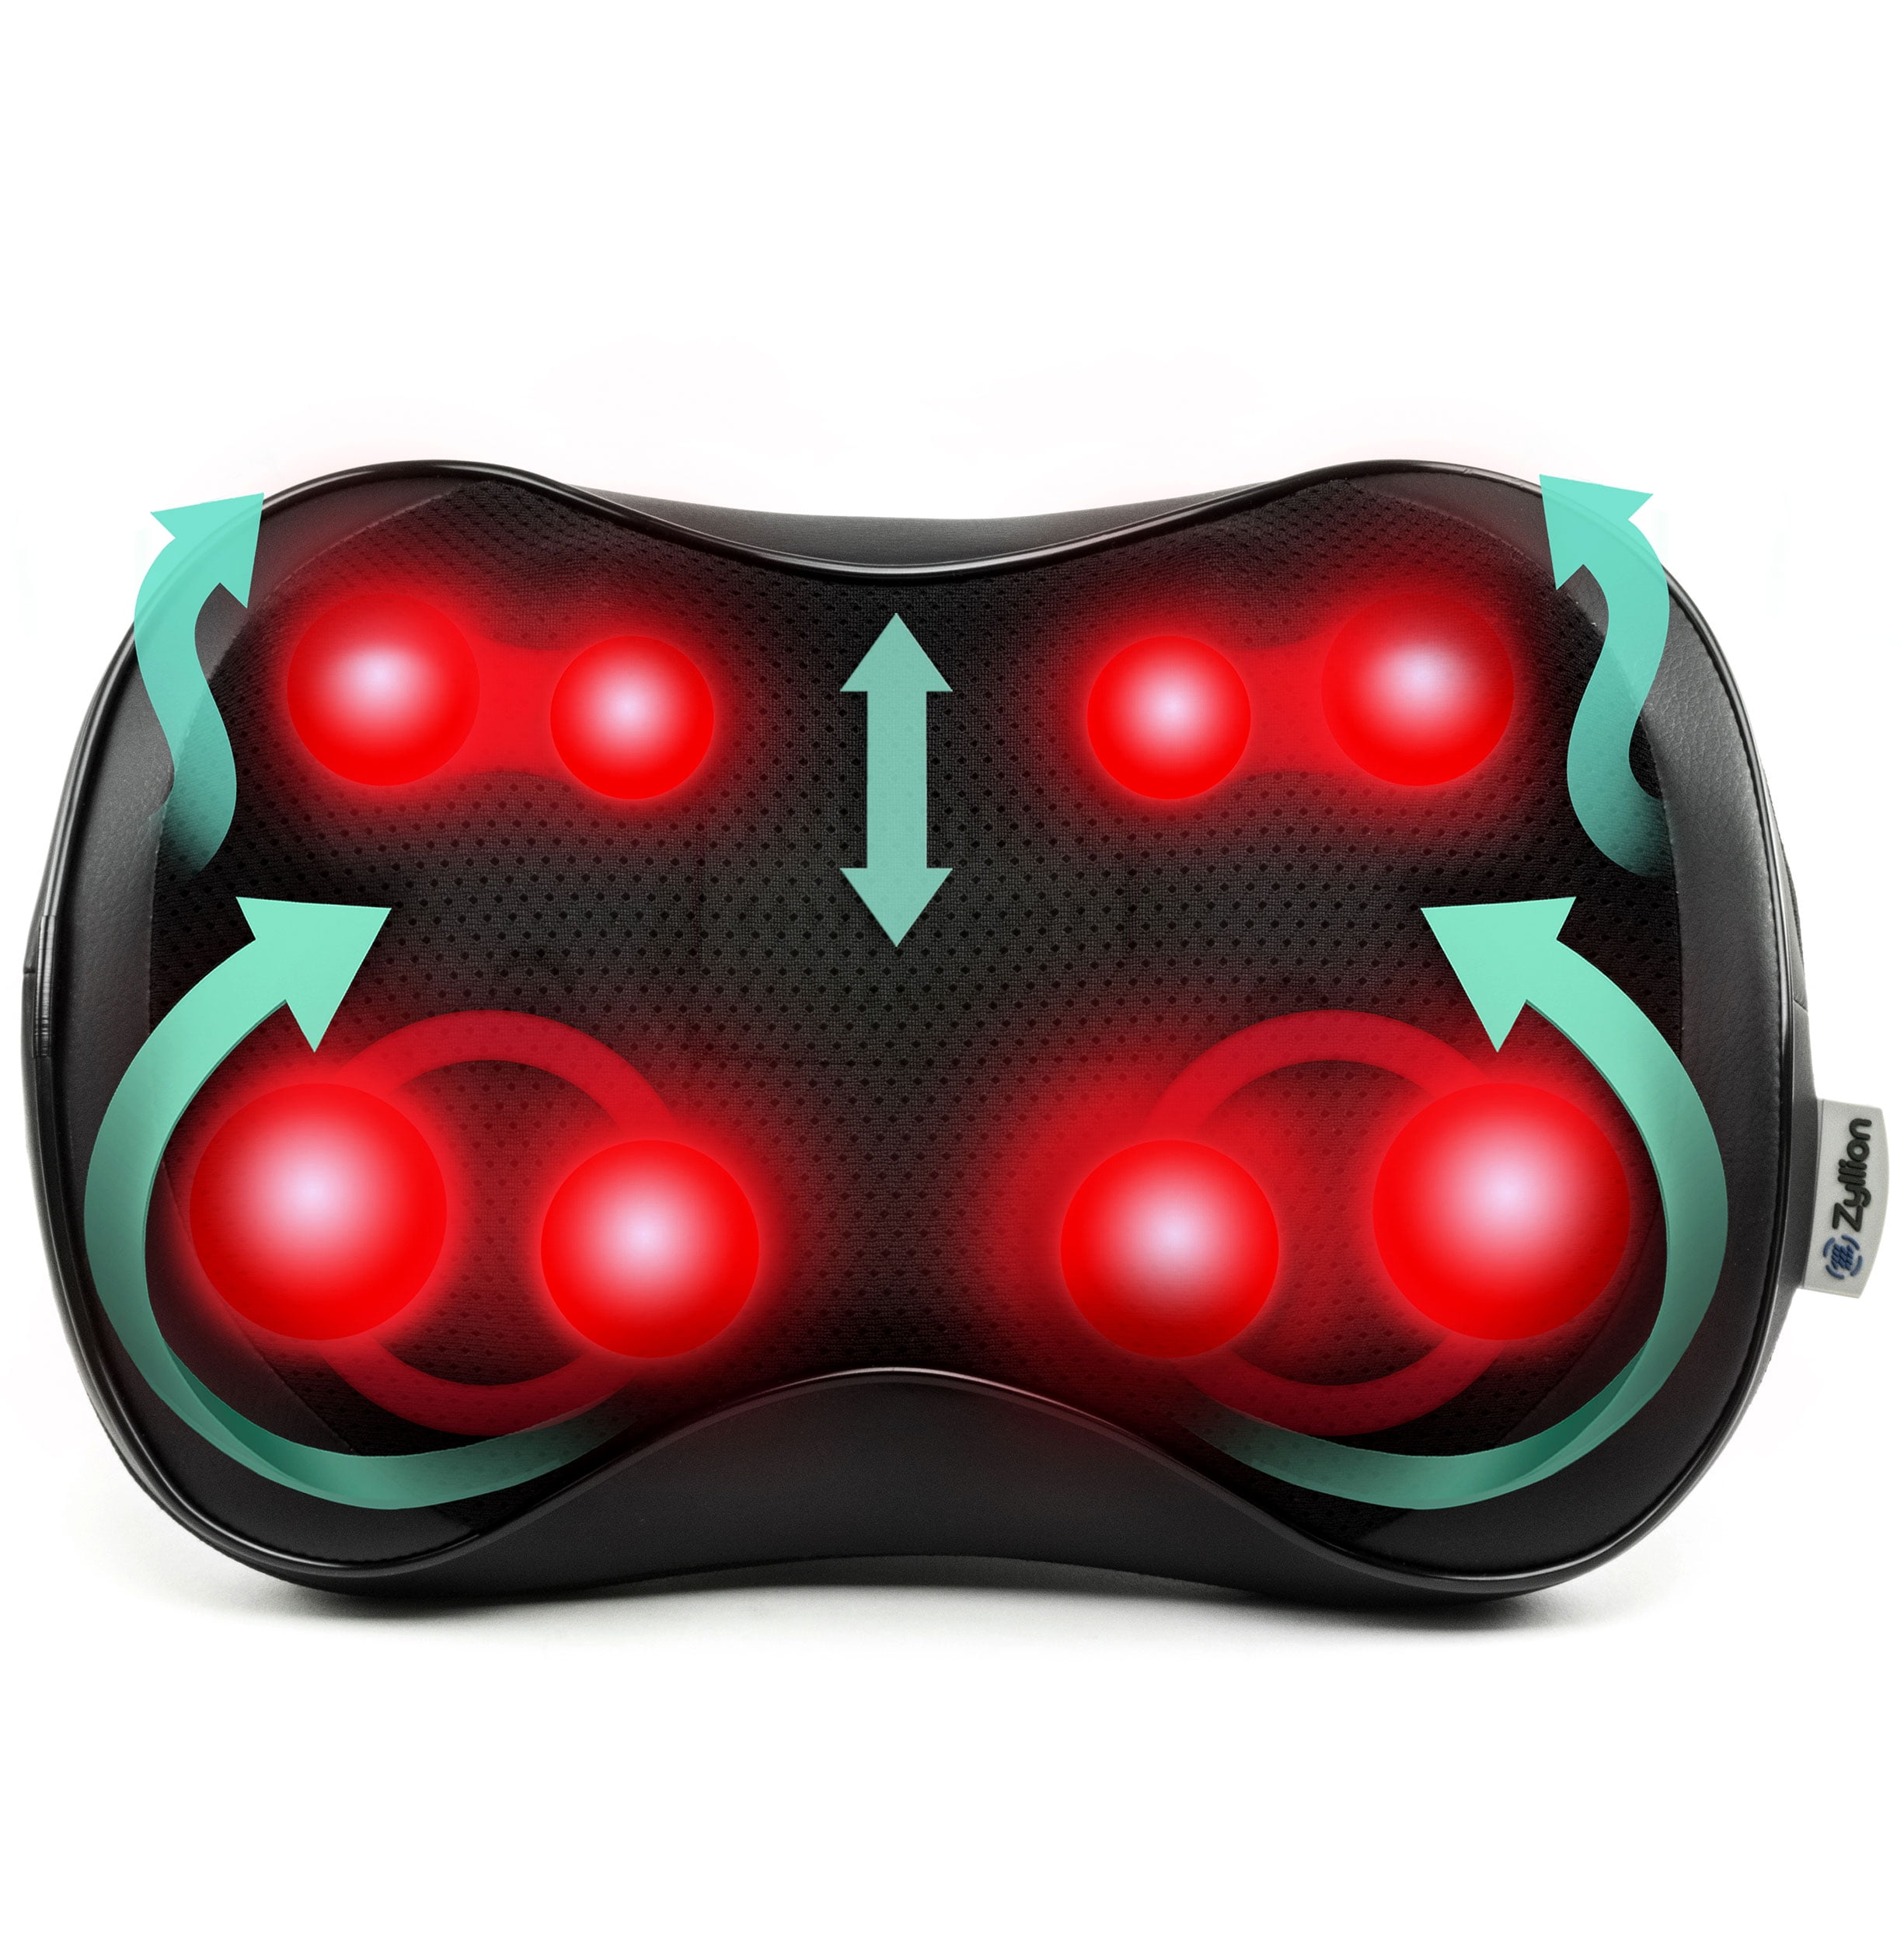  Zyllion Rechargeable Back and Neck Massager with Heat -  Cordless Shiatsu 3D Deep Tissue Massage Pillow, 2 Speeds and Bi-Directional  Control for Muscle Pain Relief - Black (ZMA-34RB-BK) : Health 